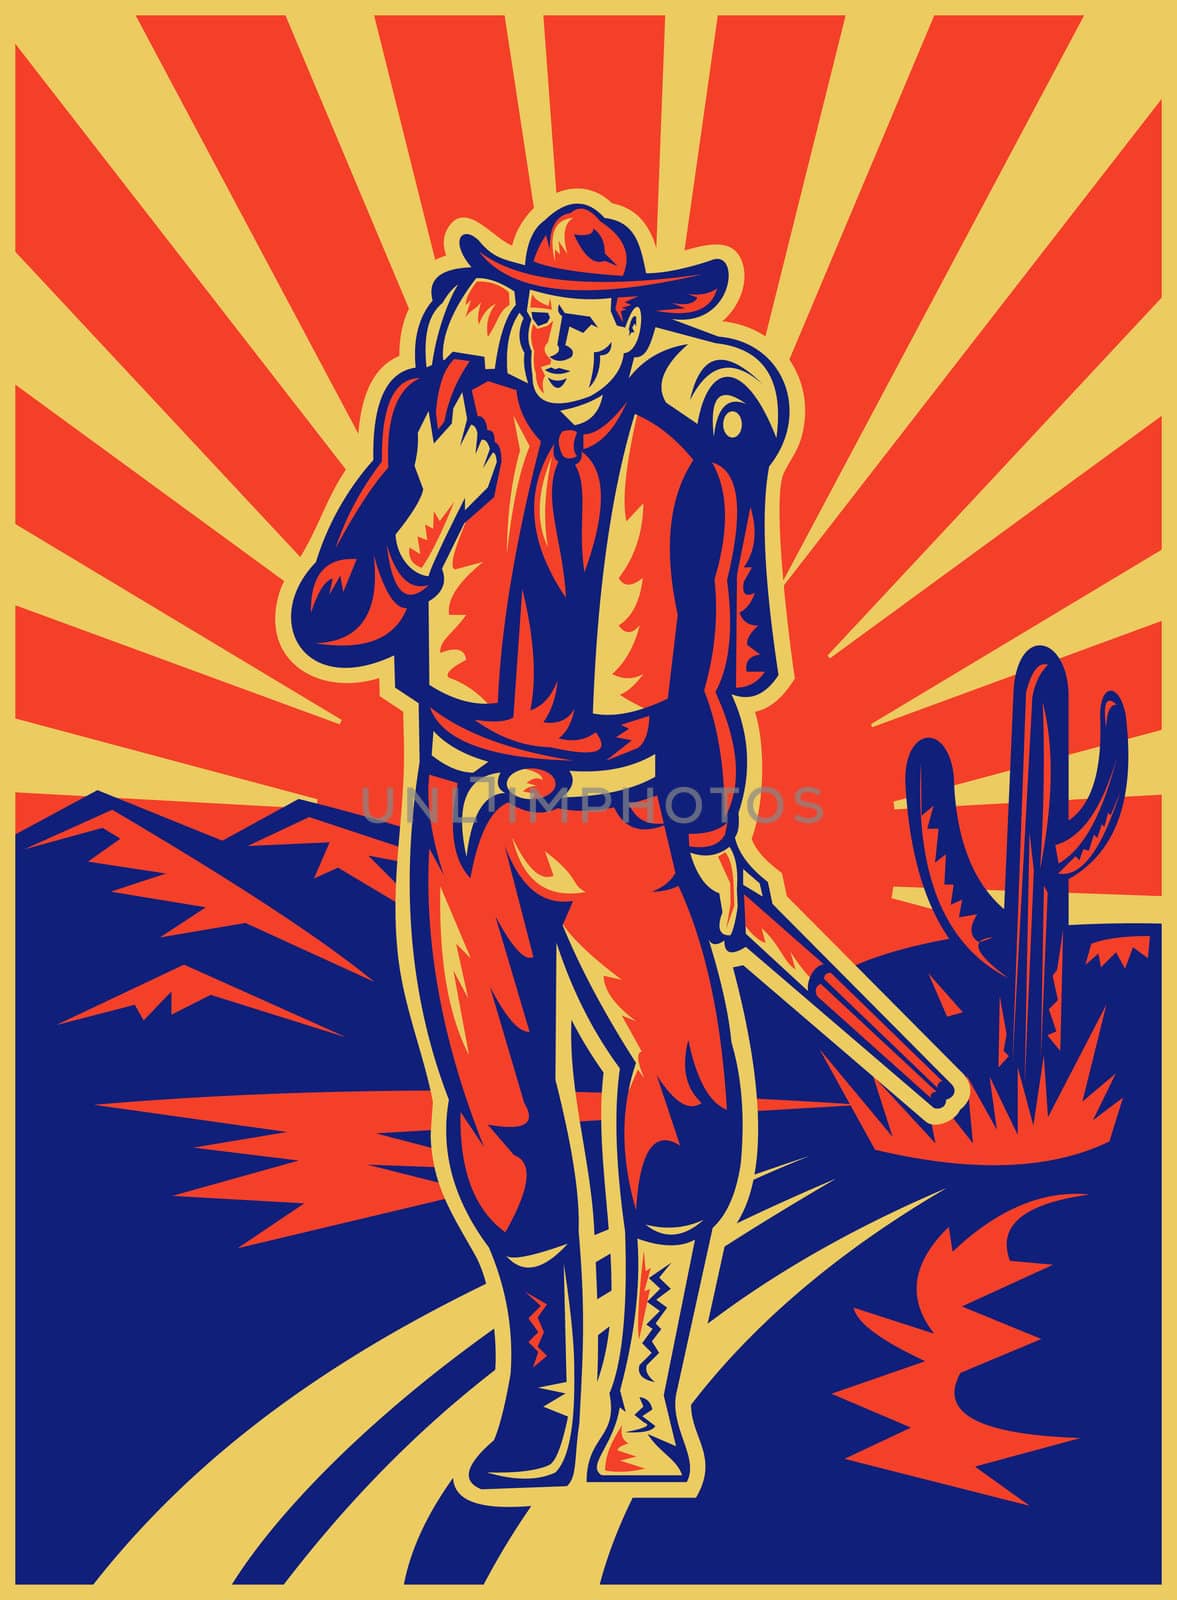 retro style illustration of a Cowboy carrying backpack and rifle walking with desert mountains and cactus in background